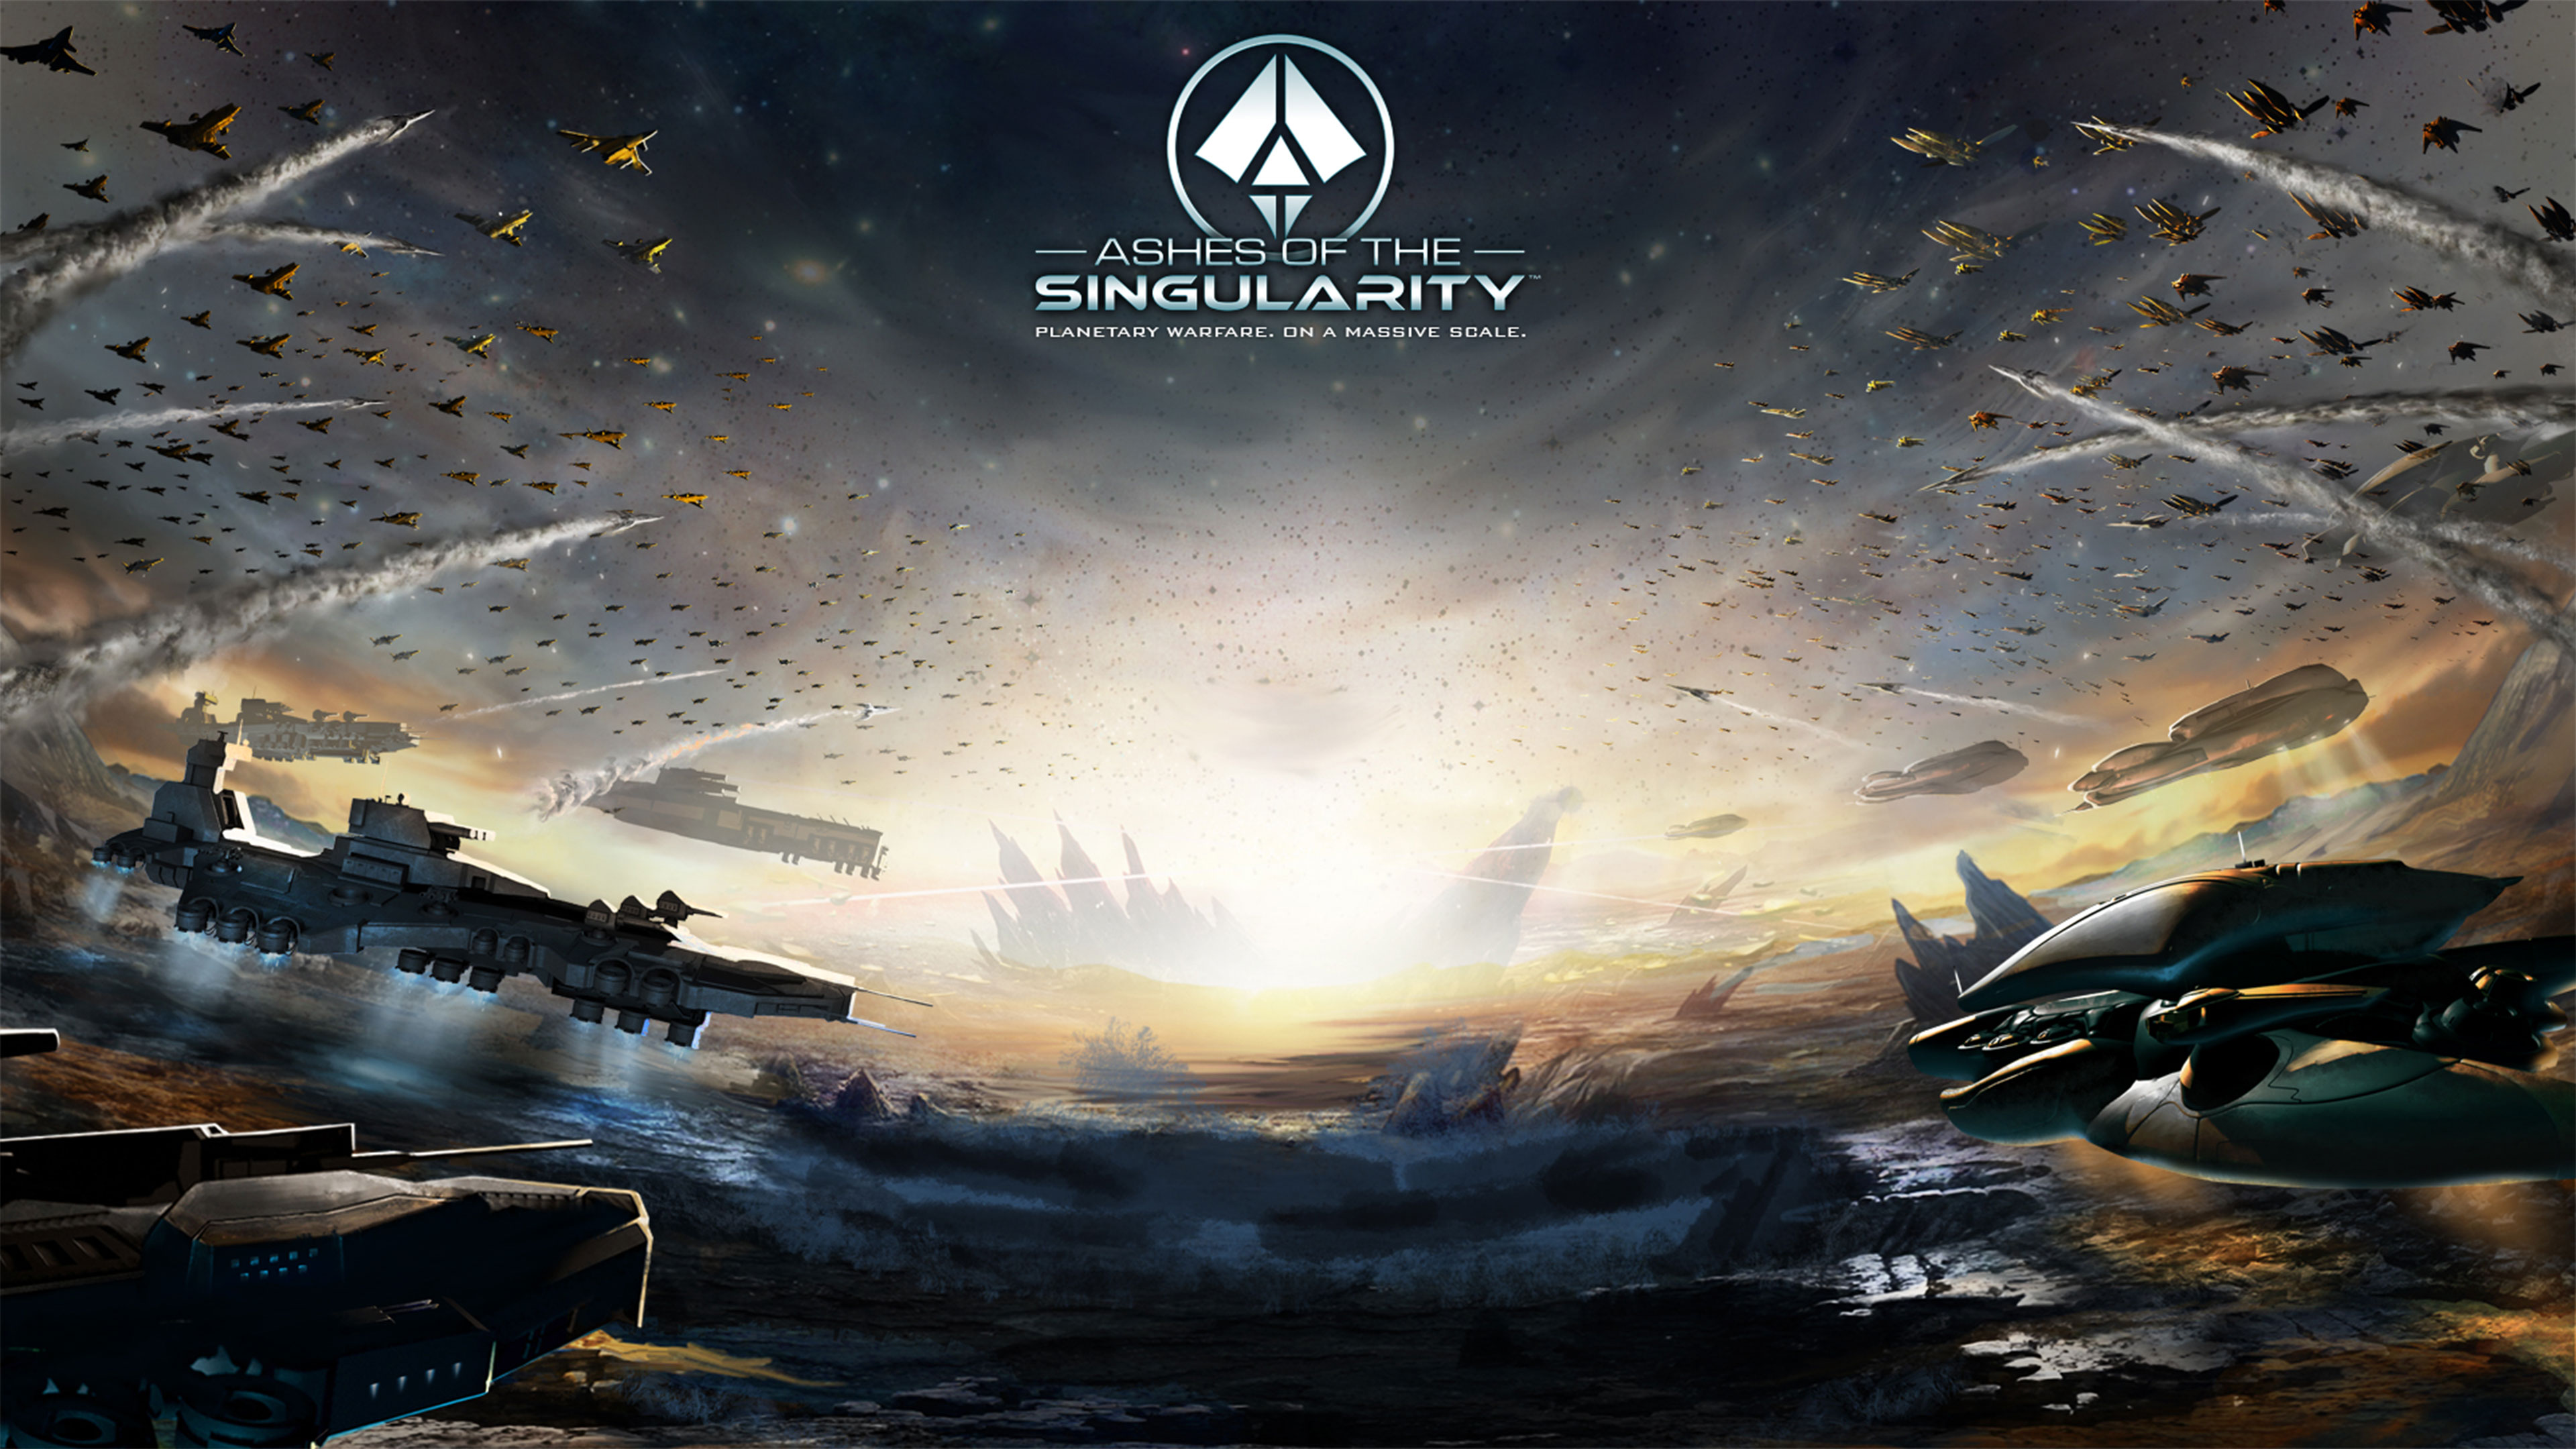 Ashes of the Singularity Wallpapers in Ultra HD | 4K - 3840 x 2160 jpeg 885kB